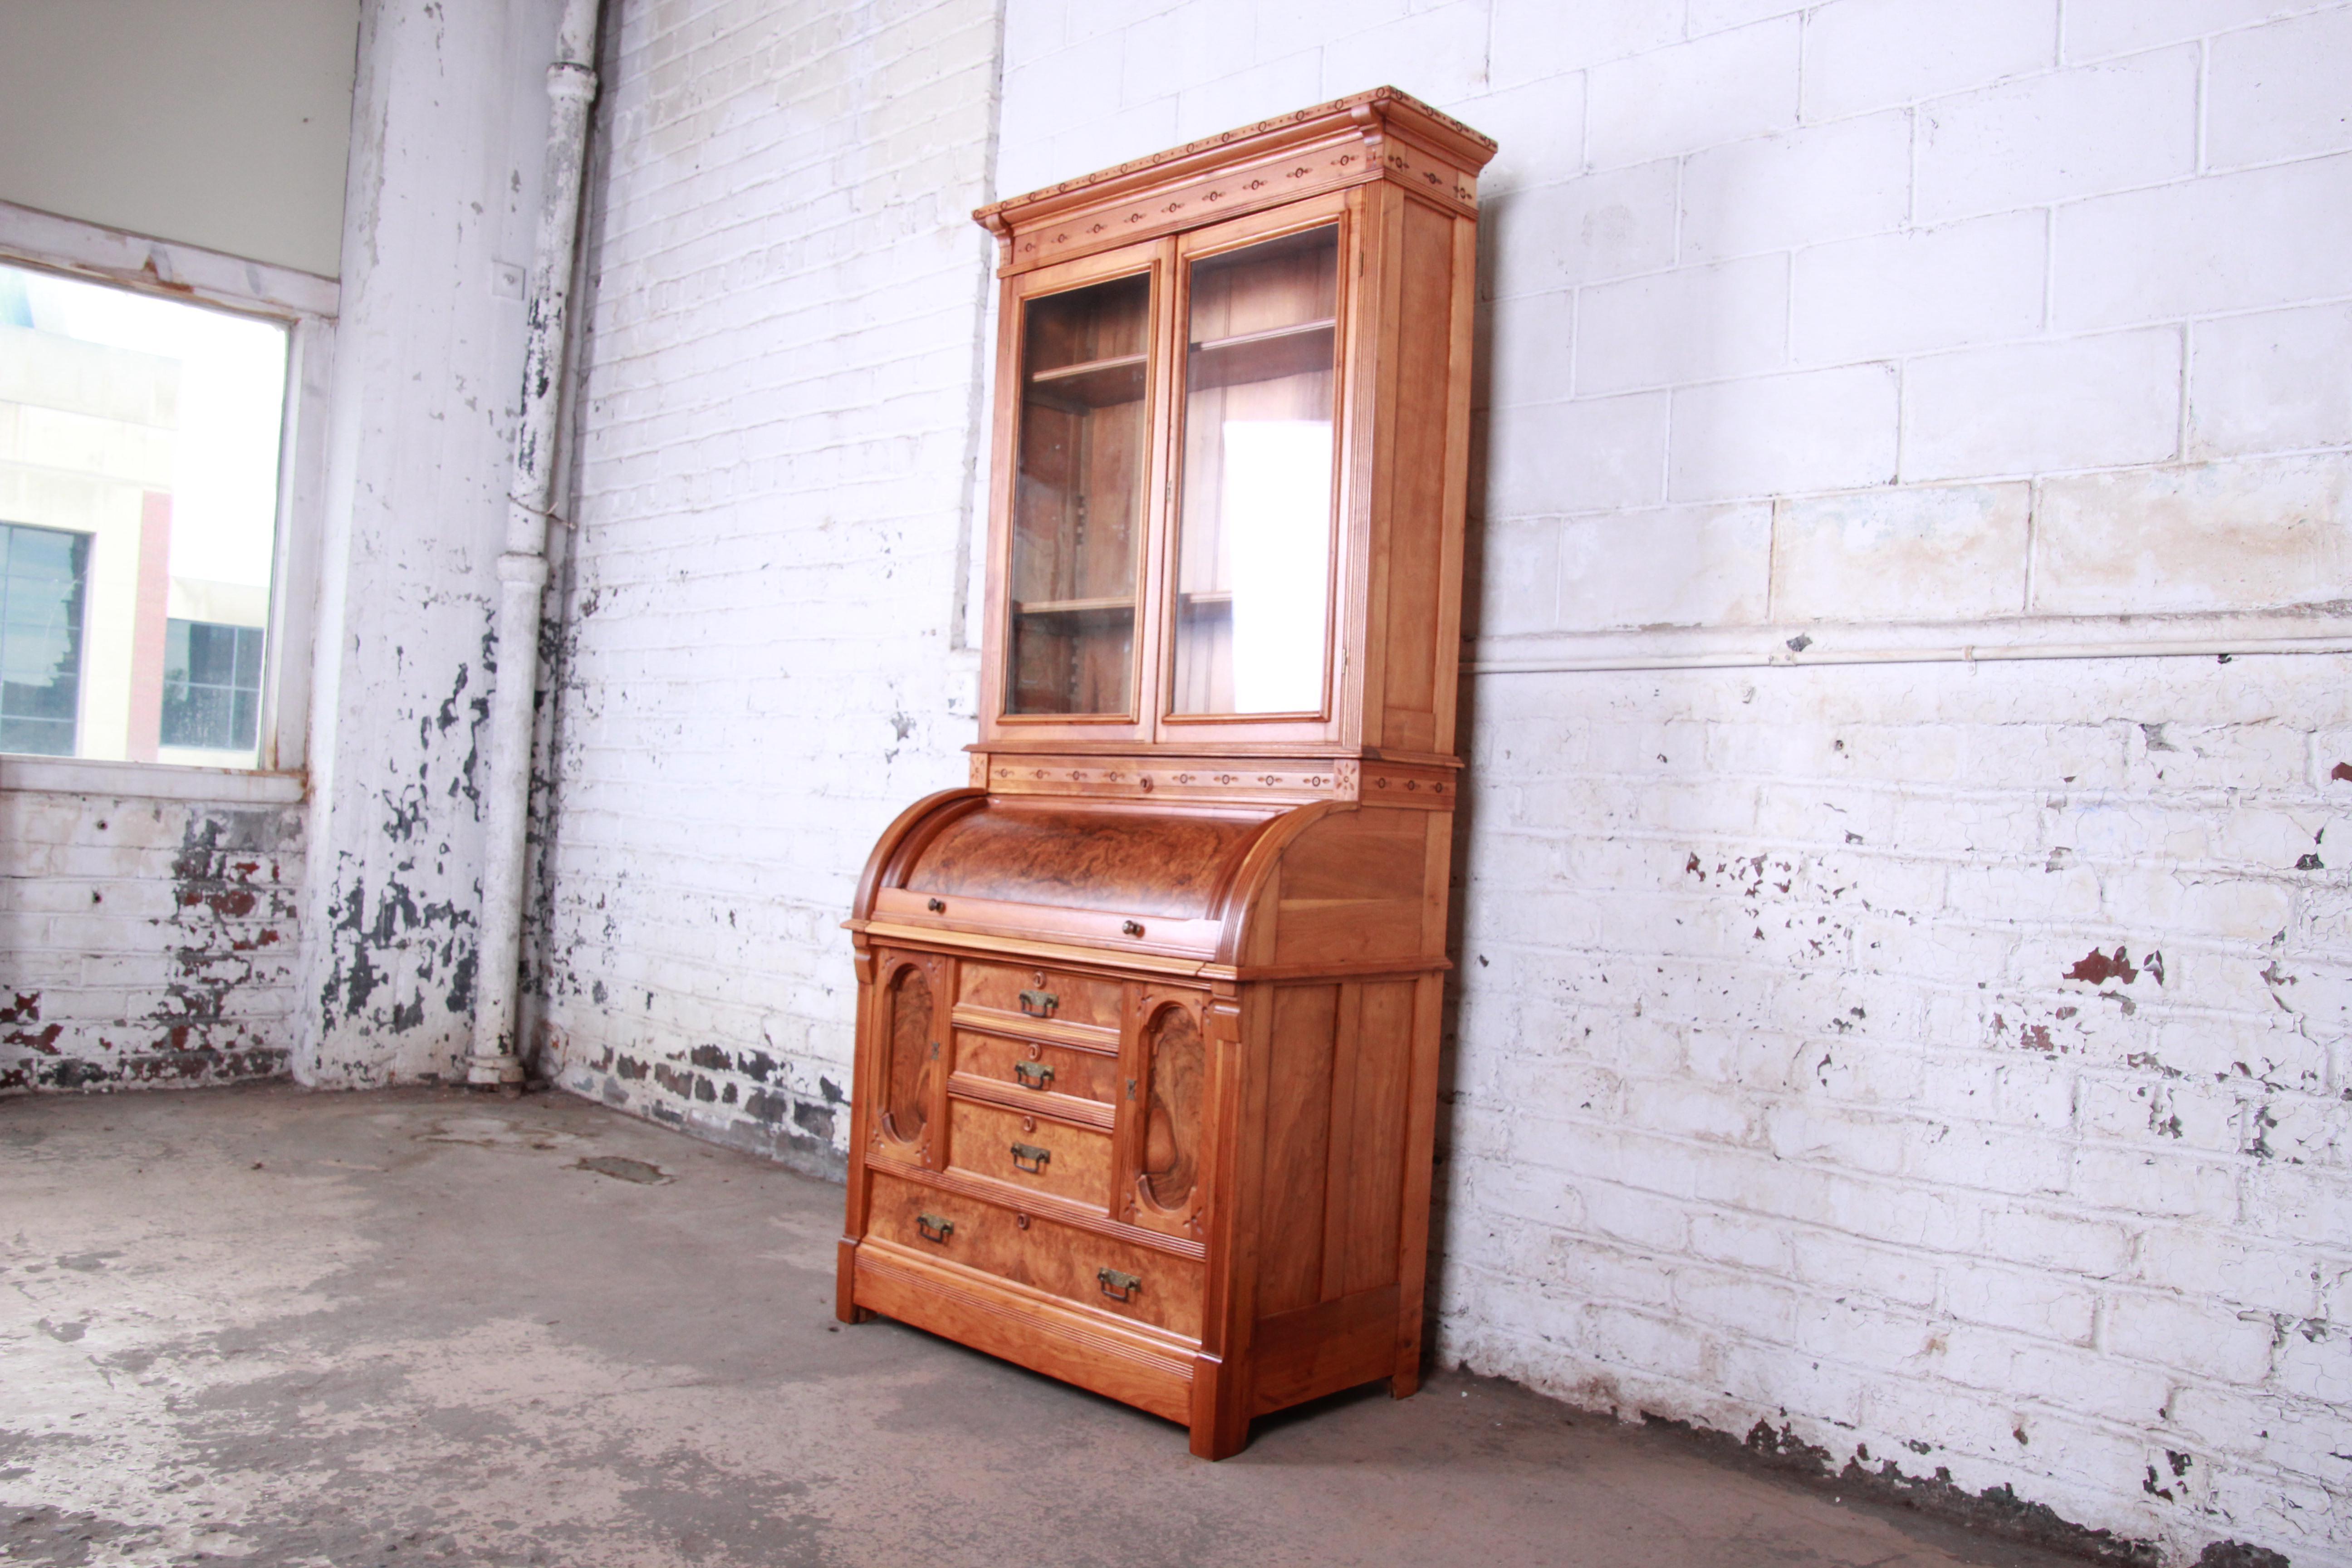 An exceptional 19th century Eastlake Victorian carved walnut and burl wood cylinder secretary desk with glass front bookcase. The desk features gorgeous burl wood grain and unique carved wood details. It offers ample storage and display. The top